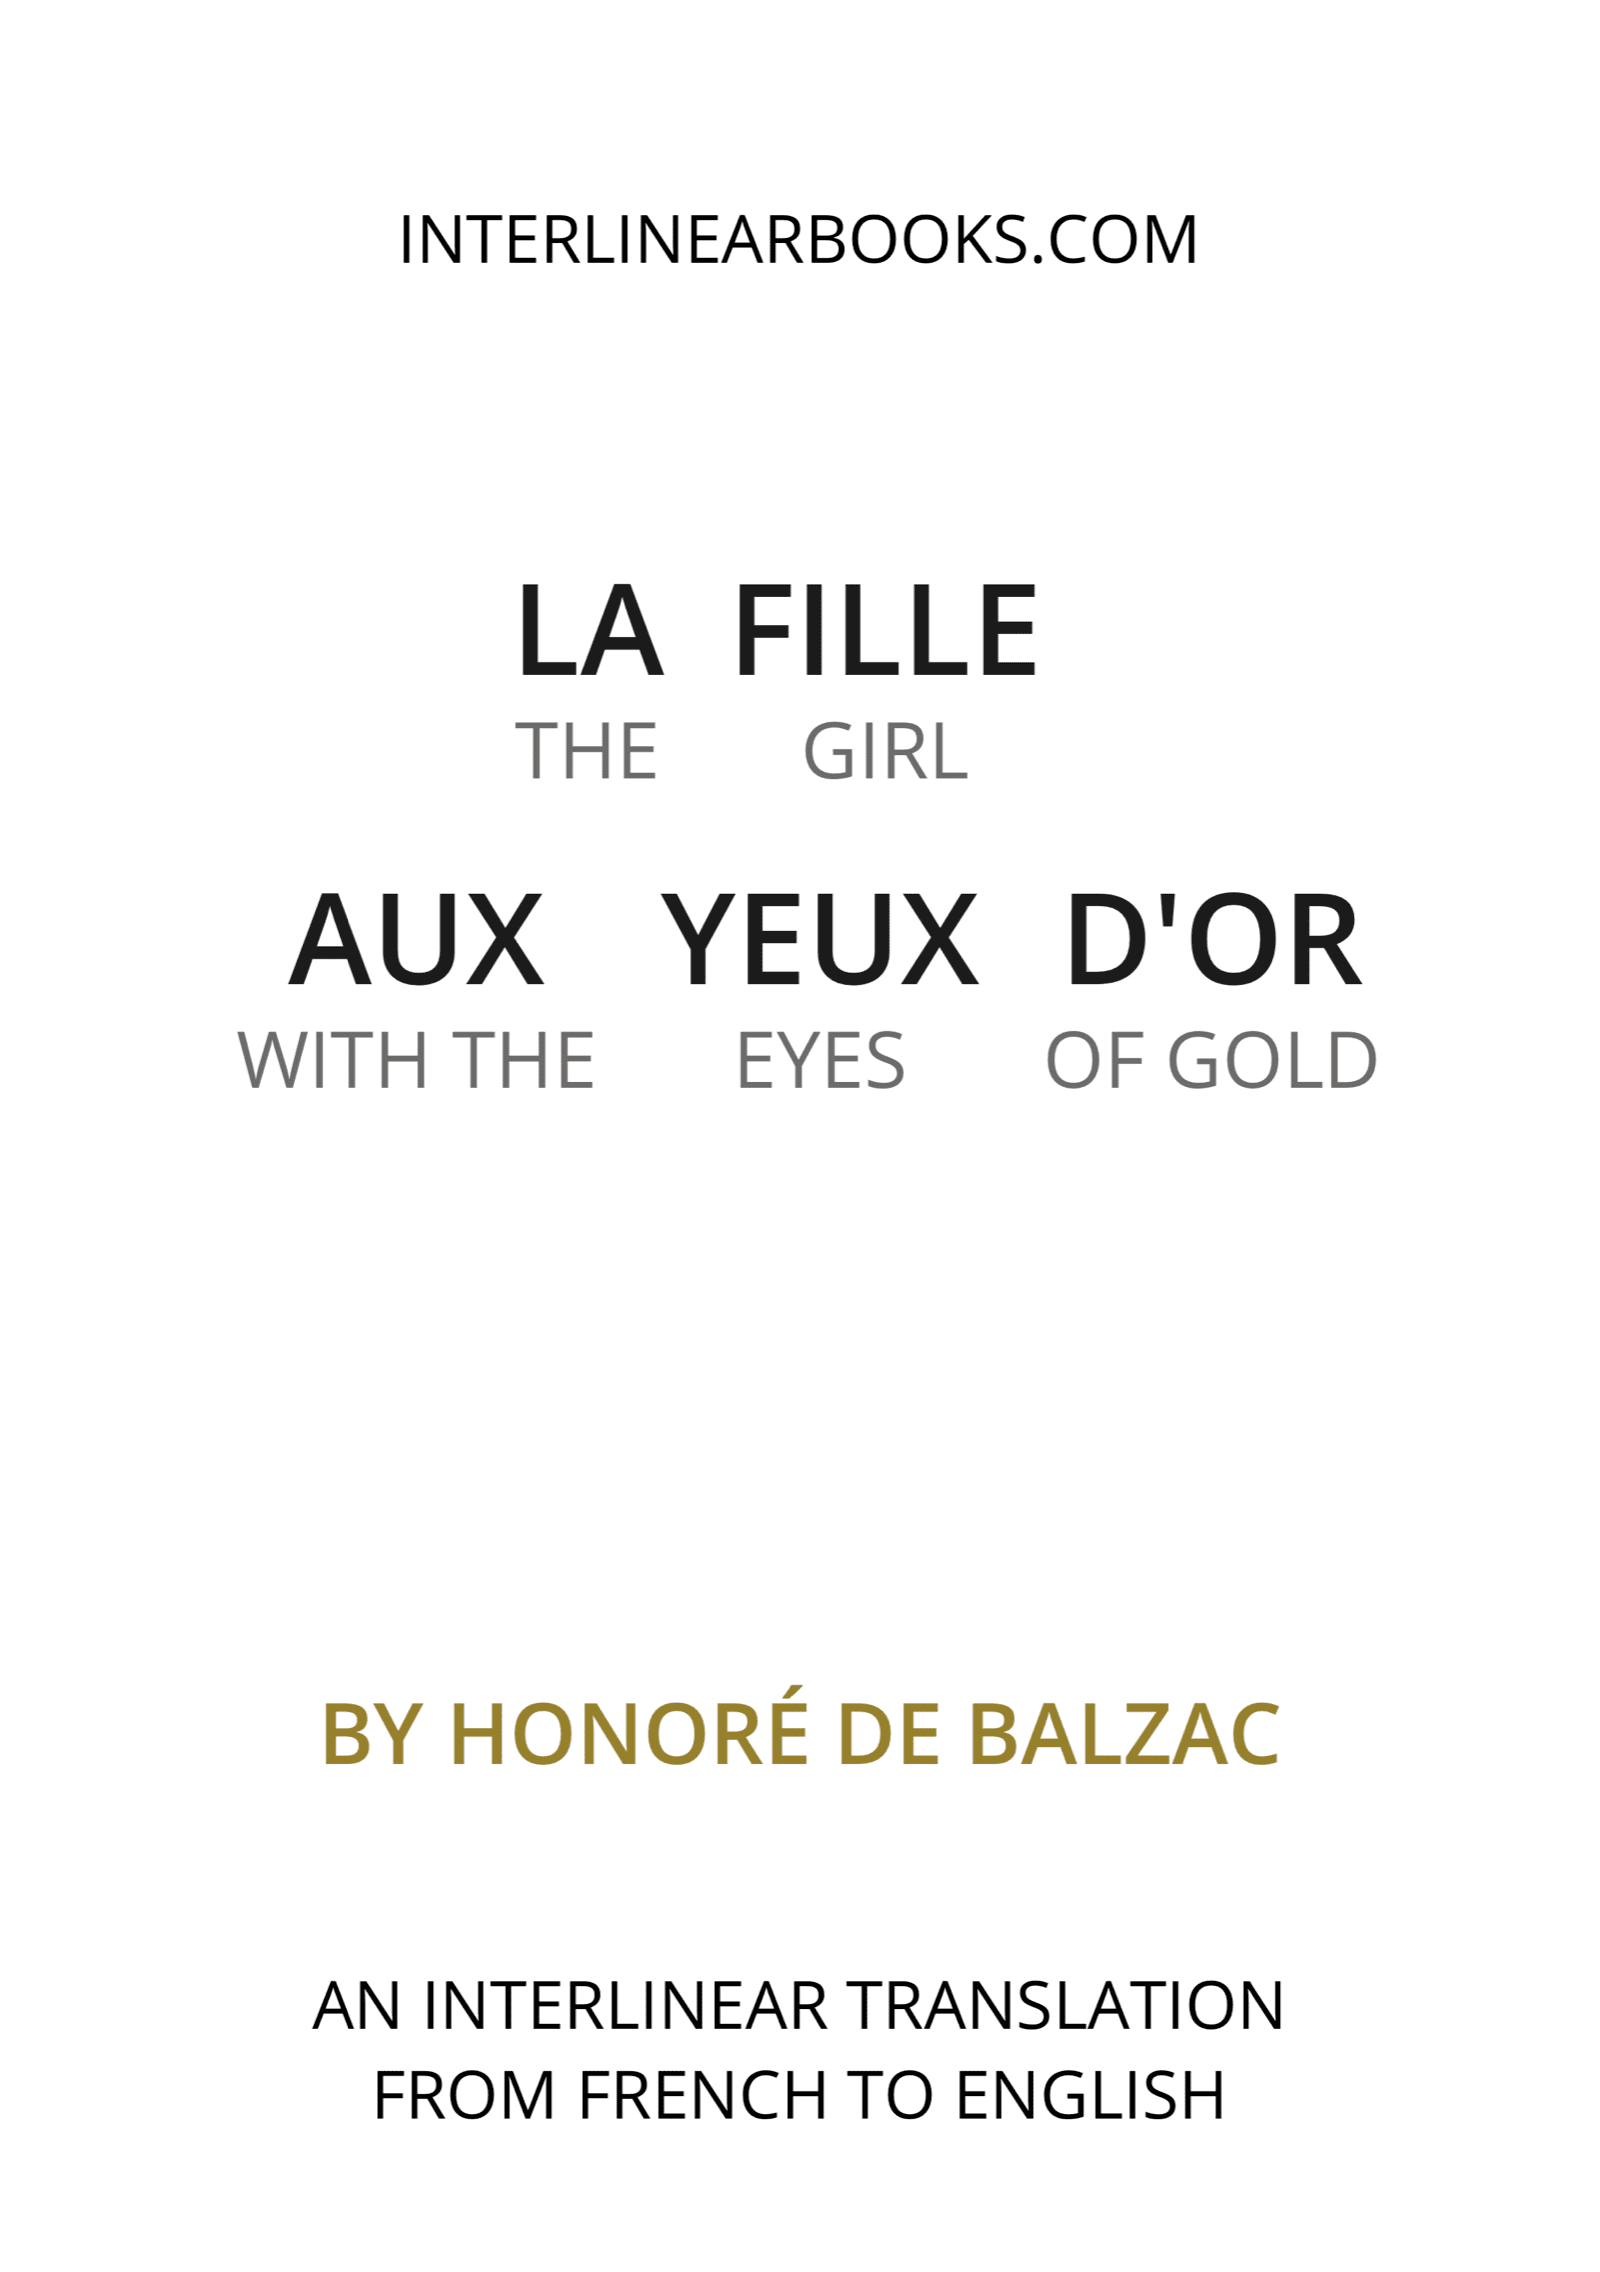 French book: La fille aux yeux d'or / The Girl With The Golden Eyes